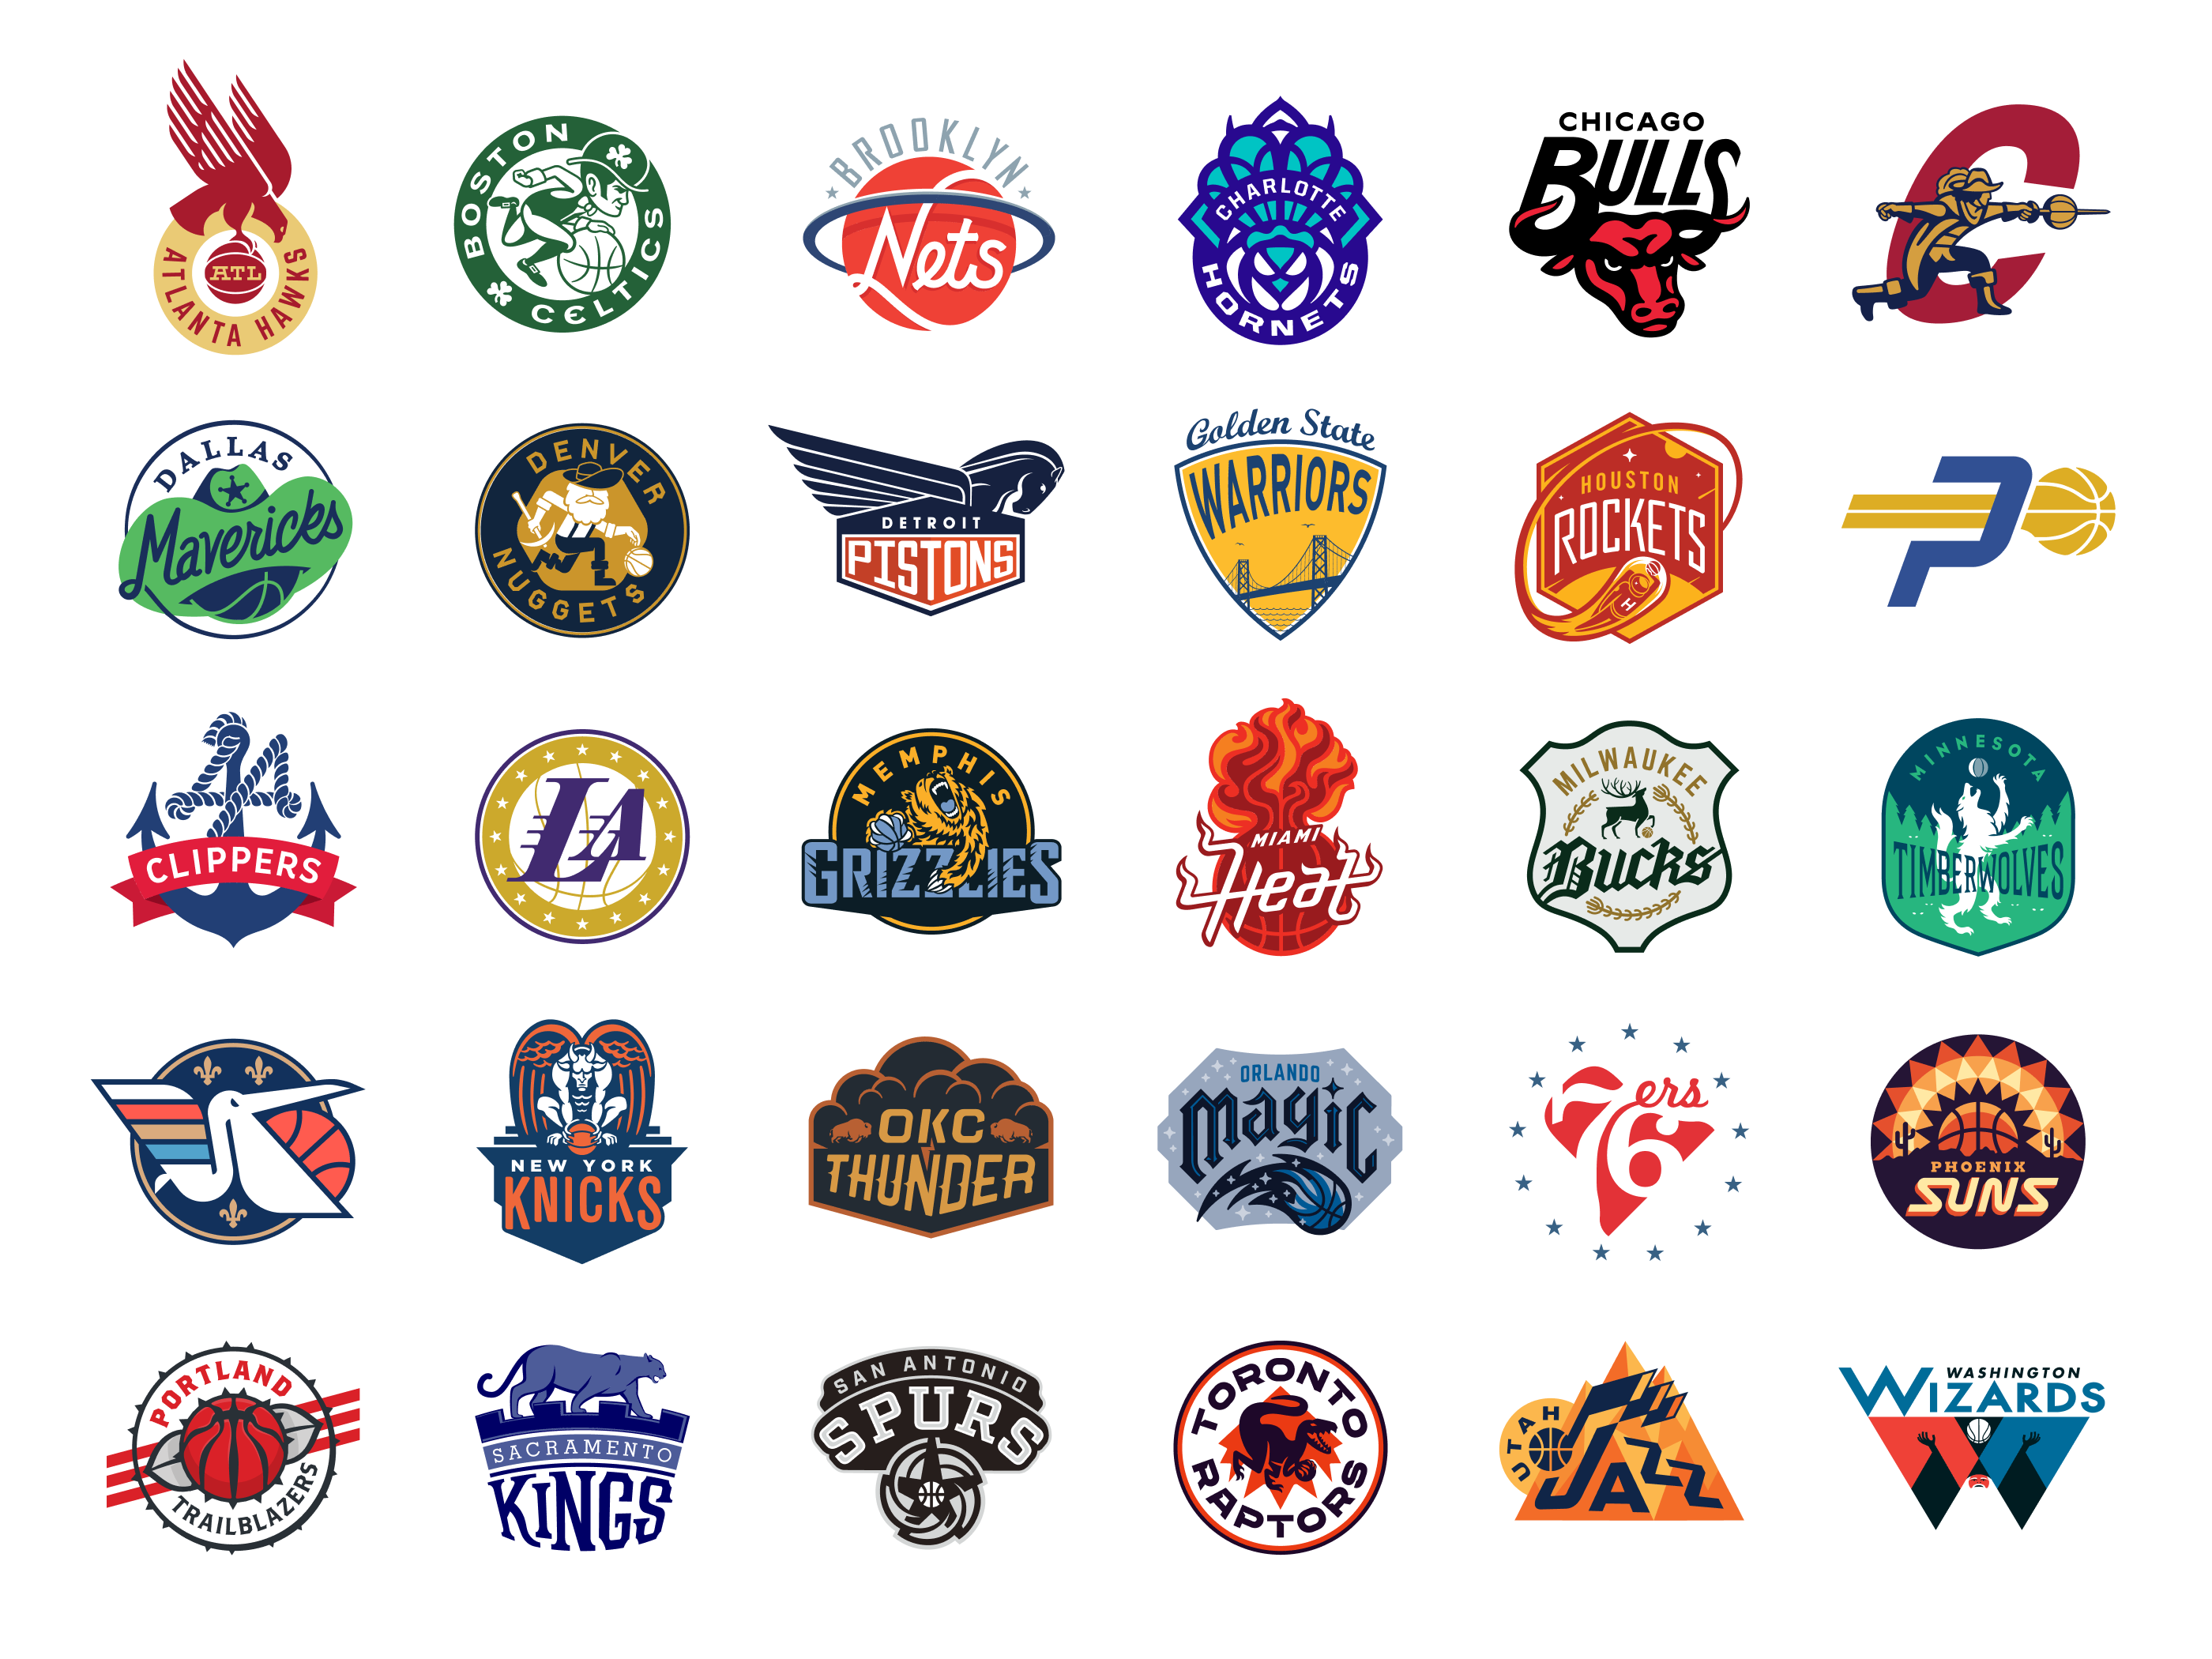 NBA Logo Redesigns by Michael Weinstein on Dribbble